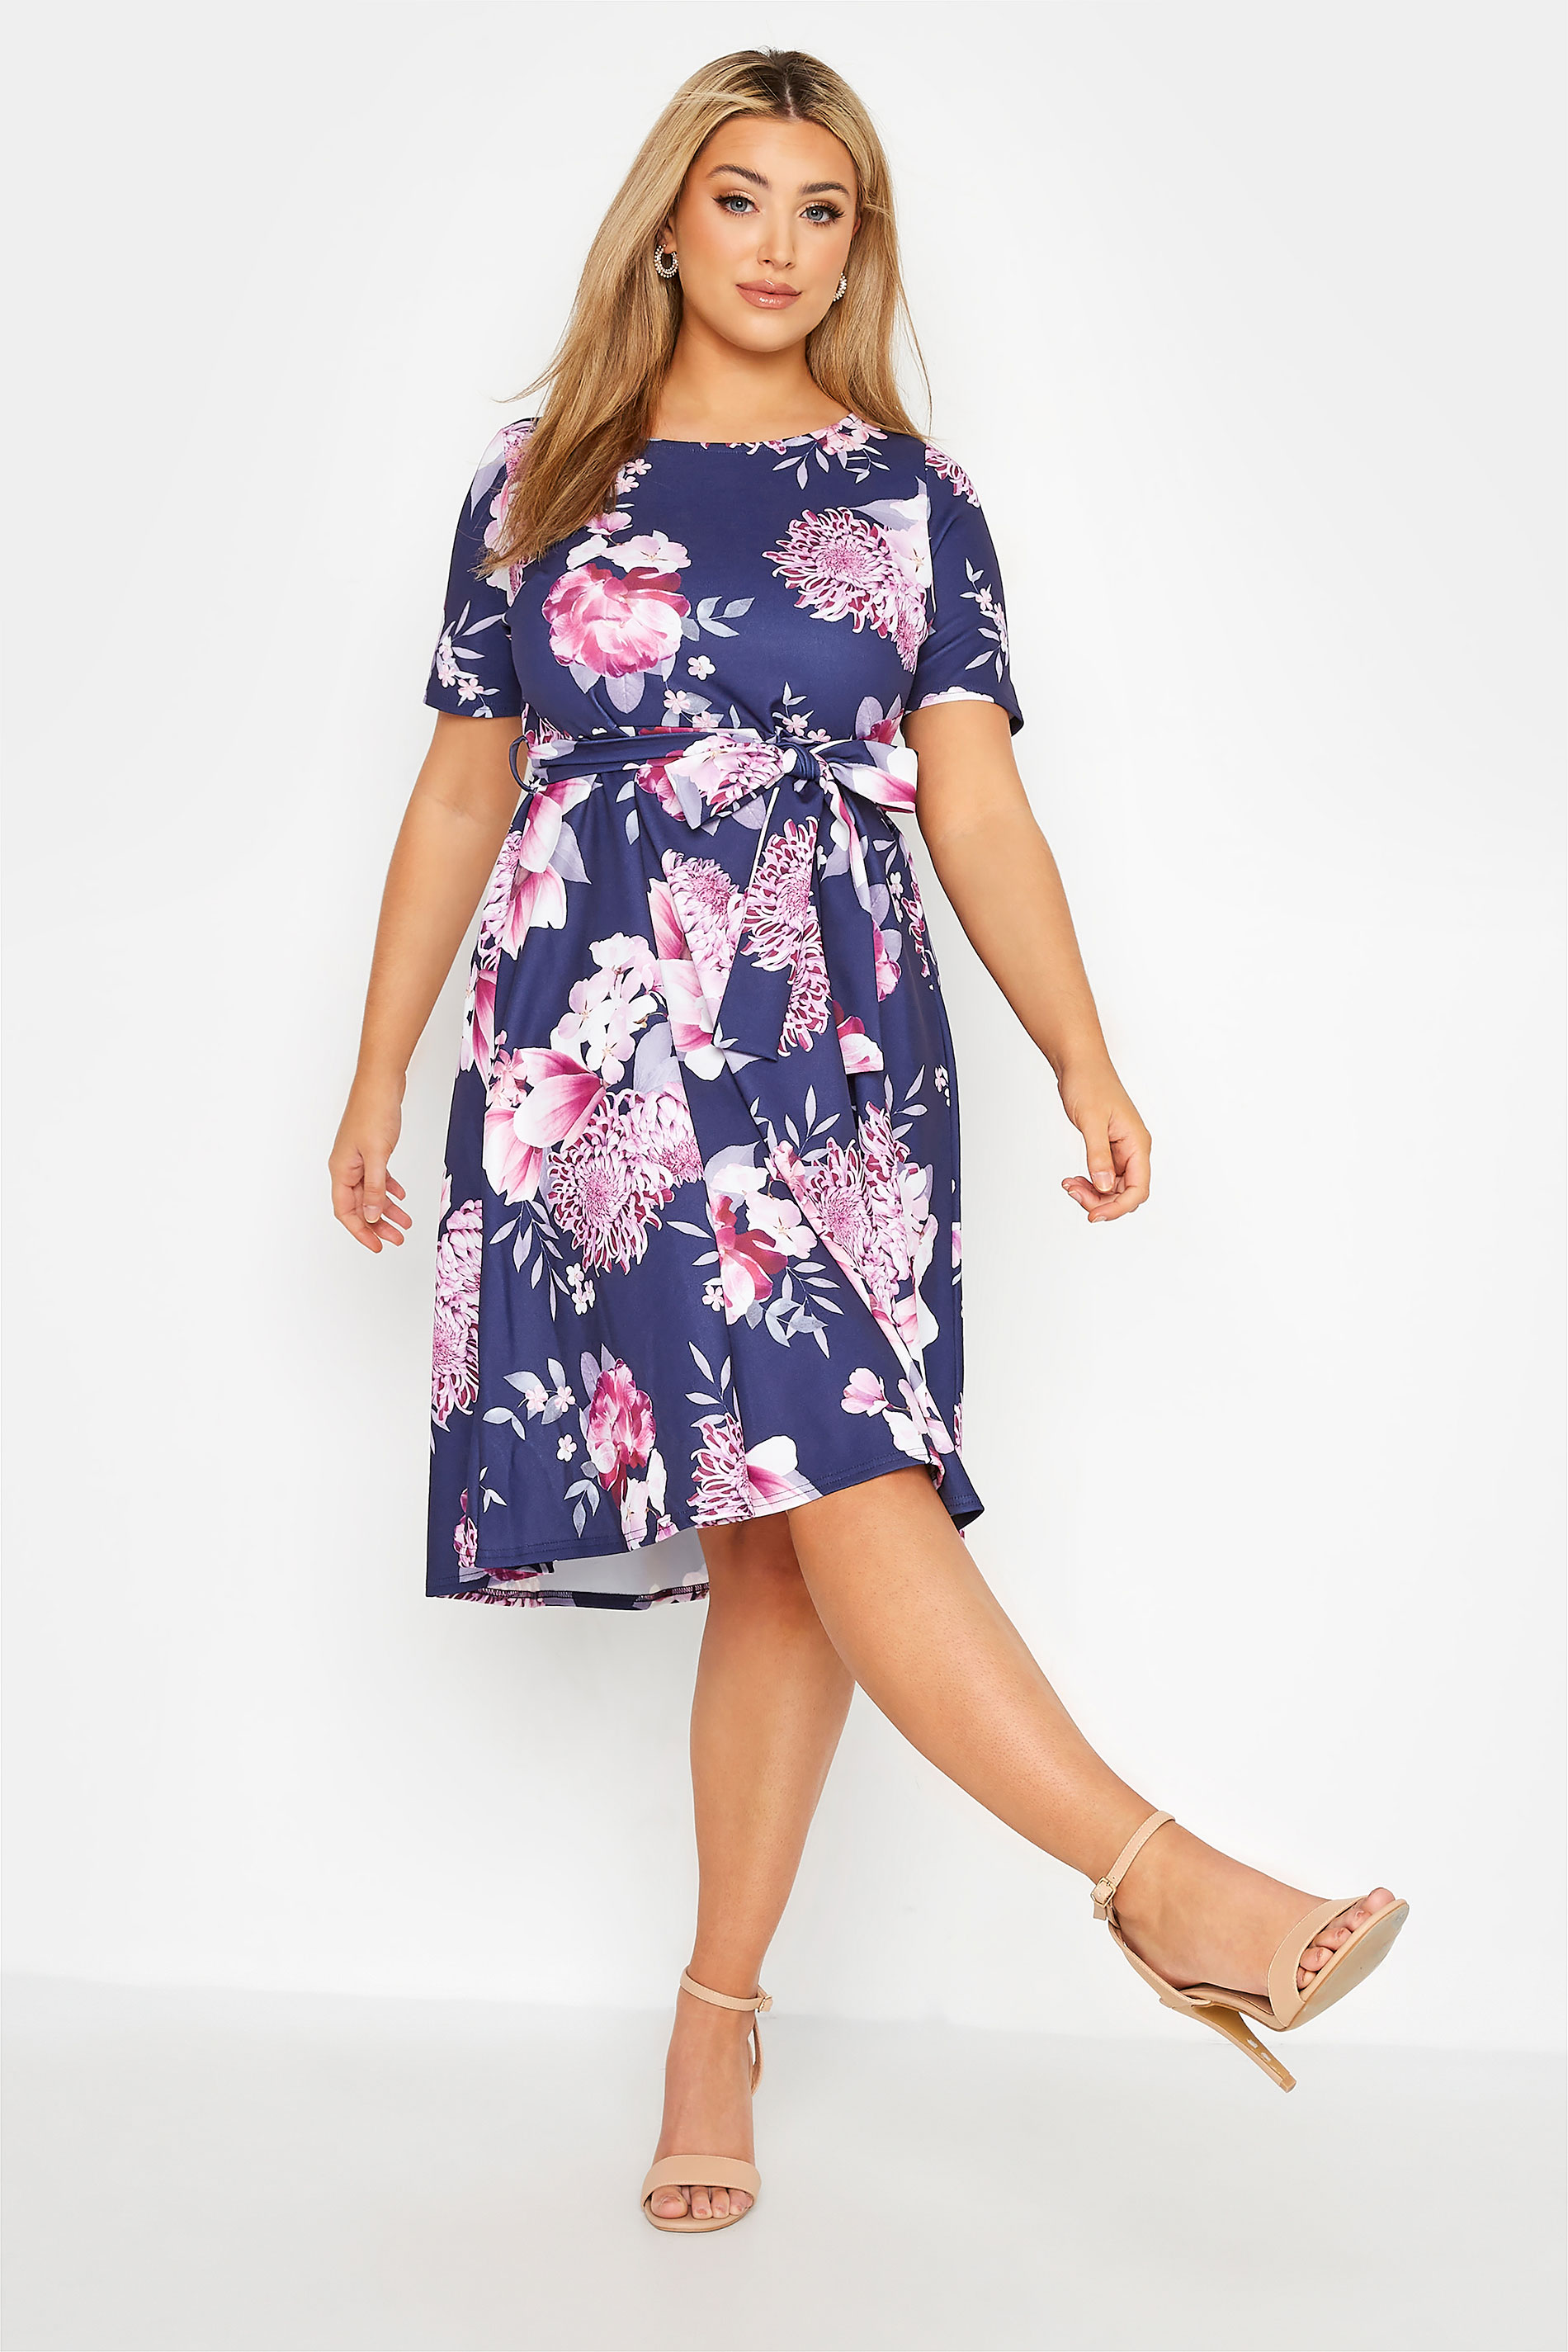 Robes Grande Taille Grande taille  Robes Patineuses | YOURS LONDON - Robe Midi Bleu Marine Floral Rose - KN48911